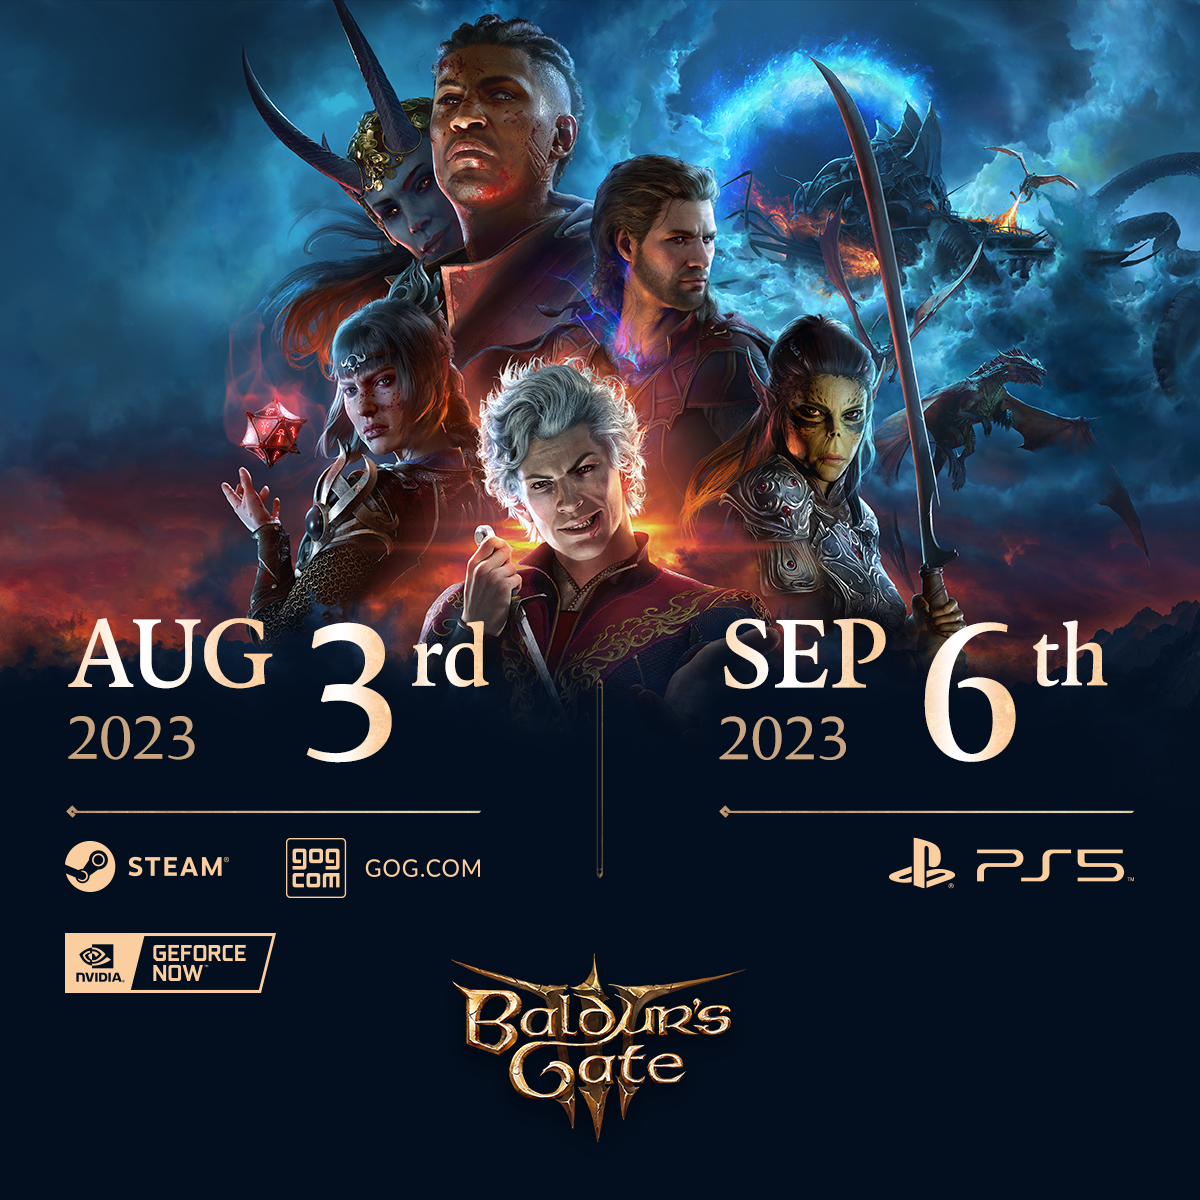 Baldur's Gate 3 Re-Rolls Initiative, Advancing PC Release Date But Delaying  PS5 - Game Informer